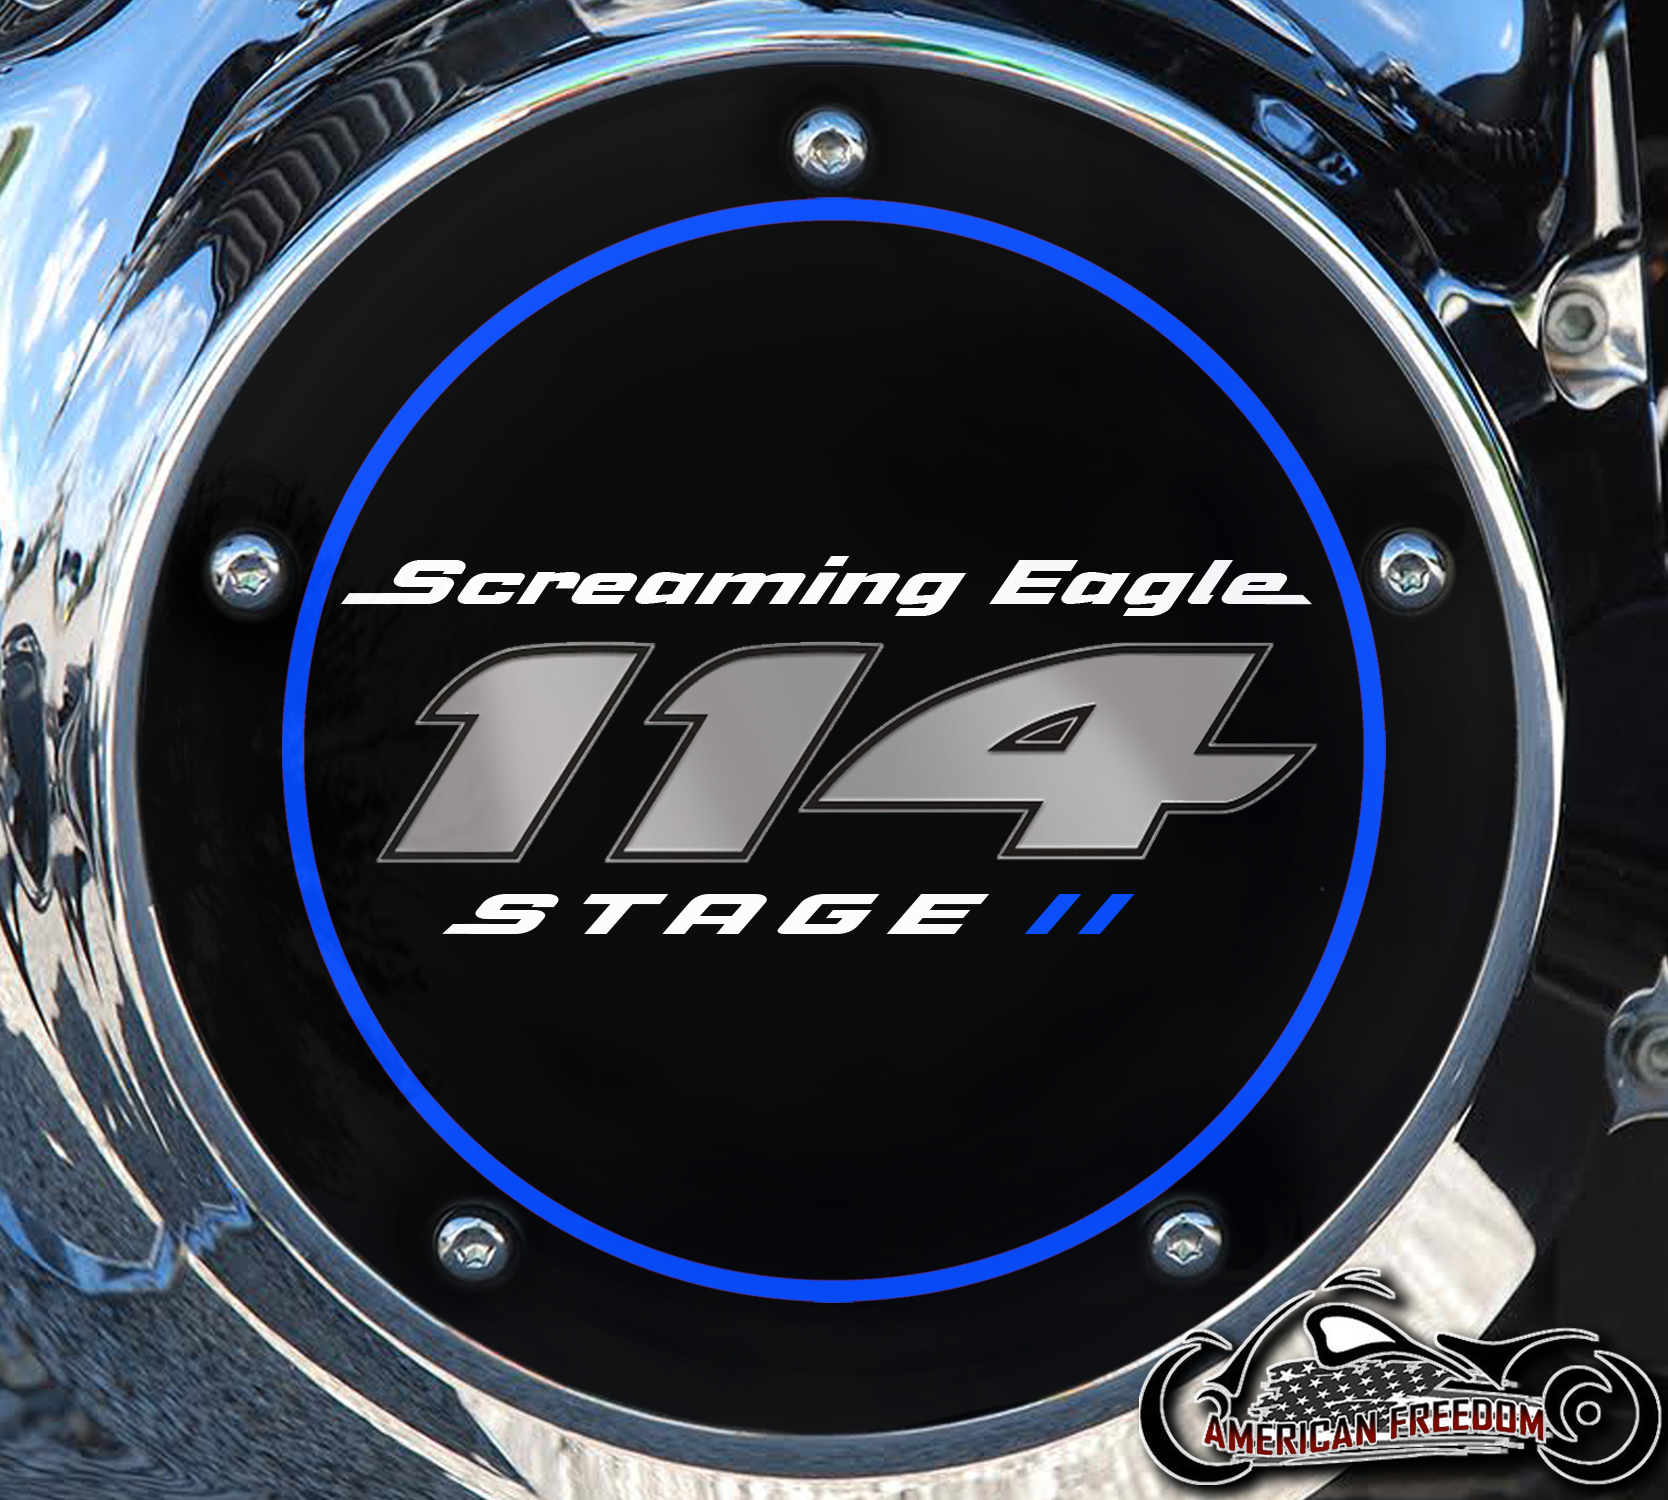 Screaming Eagle Stage II 114 DERBY COVER "BLUE"